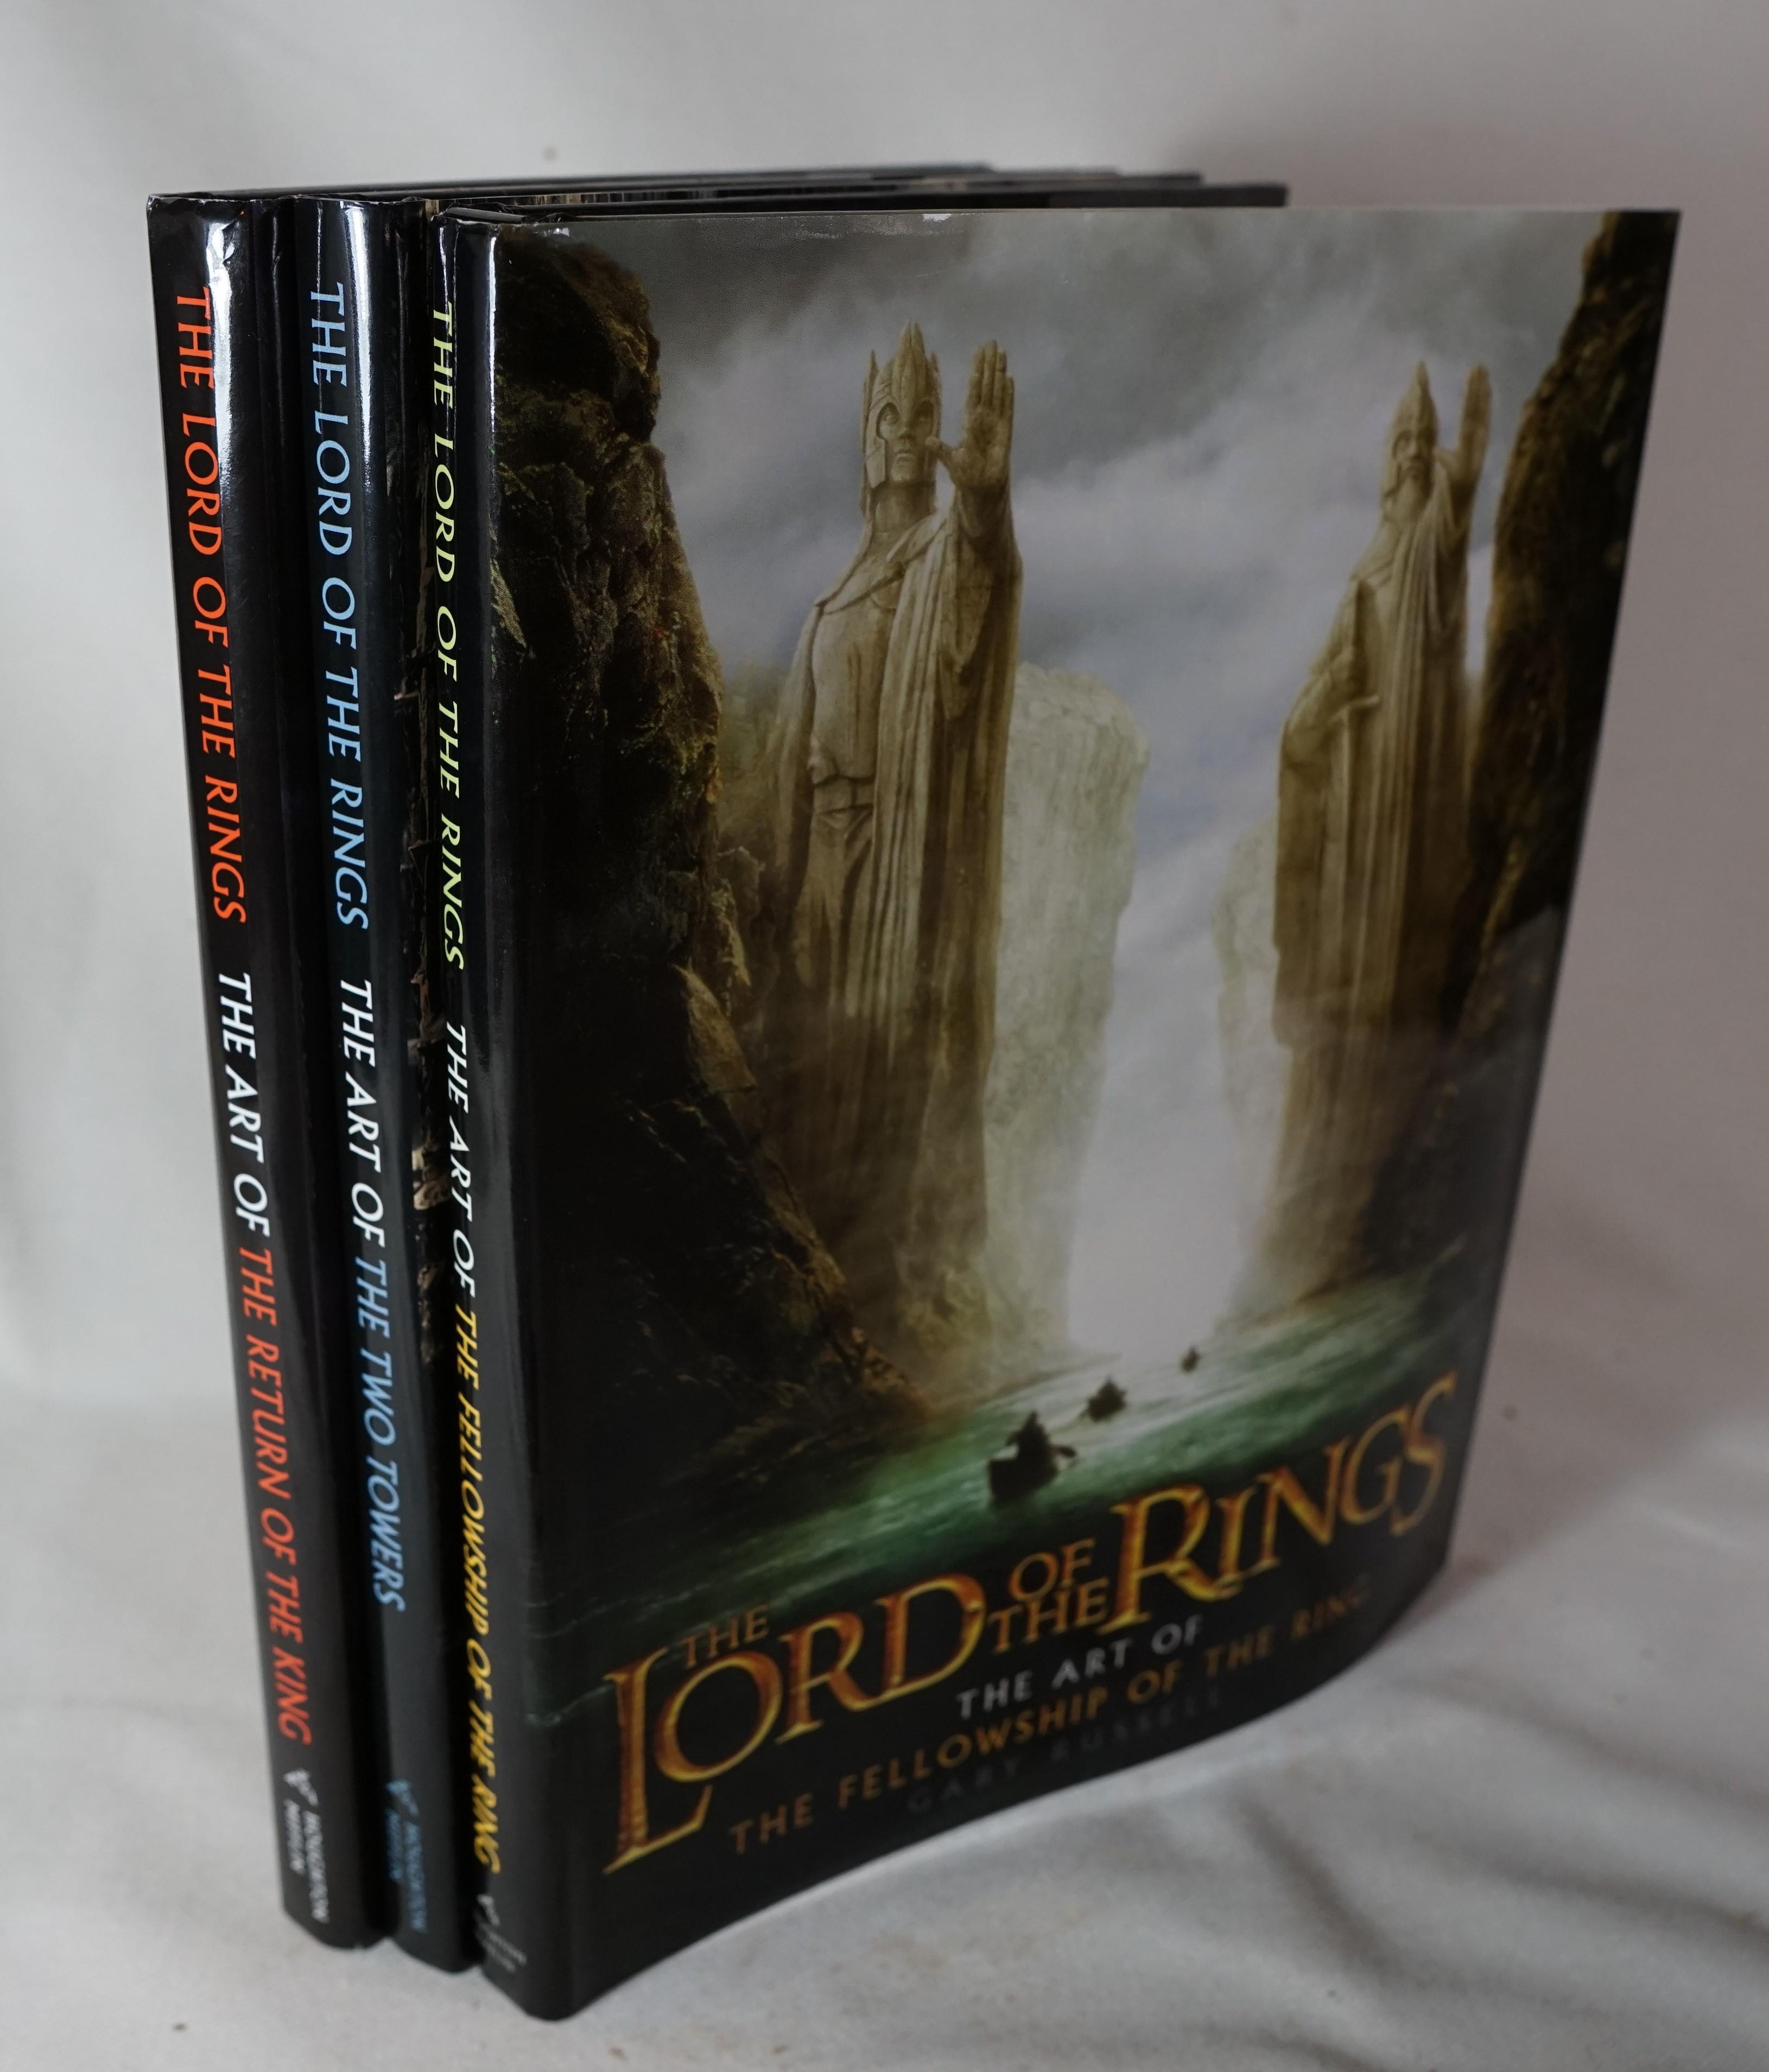 The Fellowship of the Ring(Lord of the Rings) on Apple Books